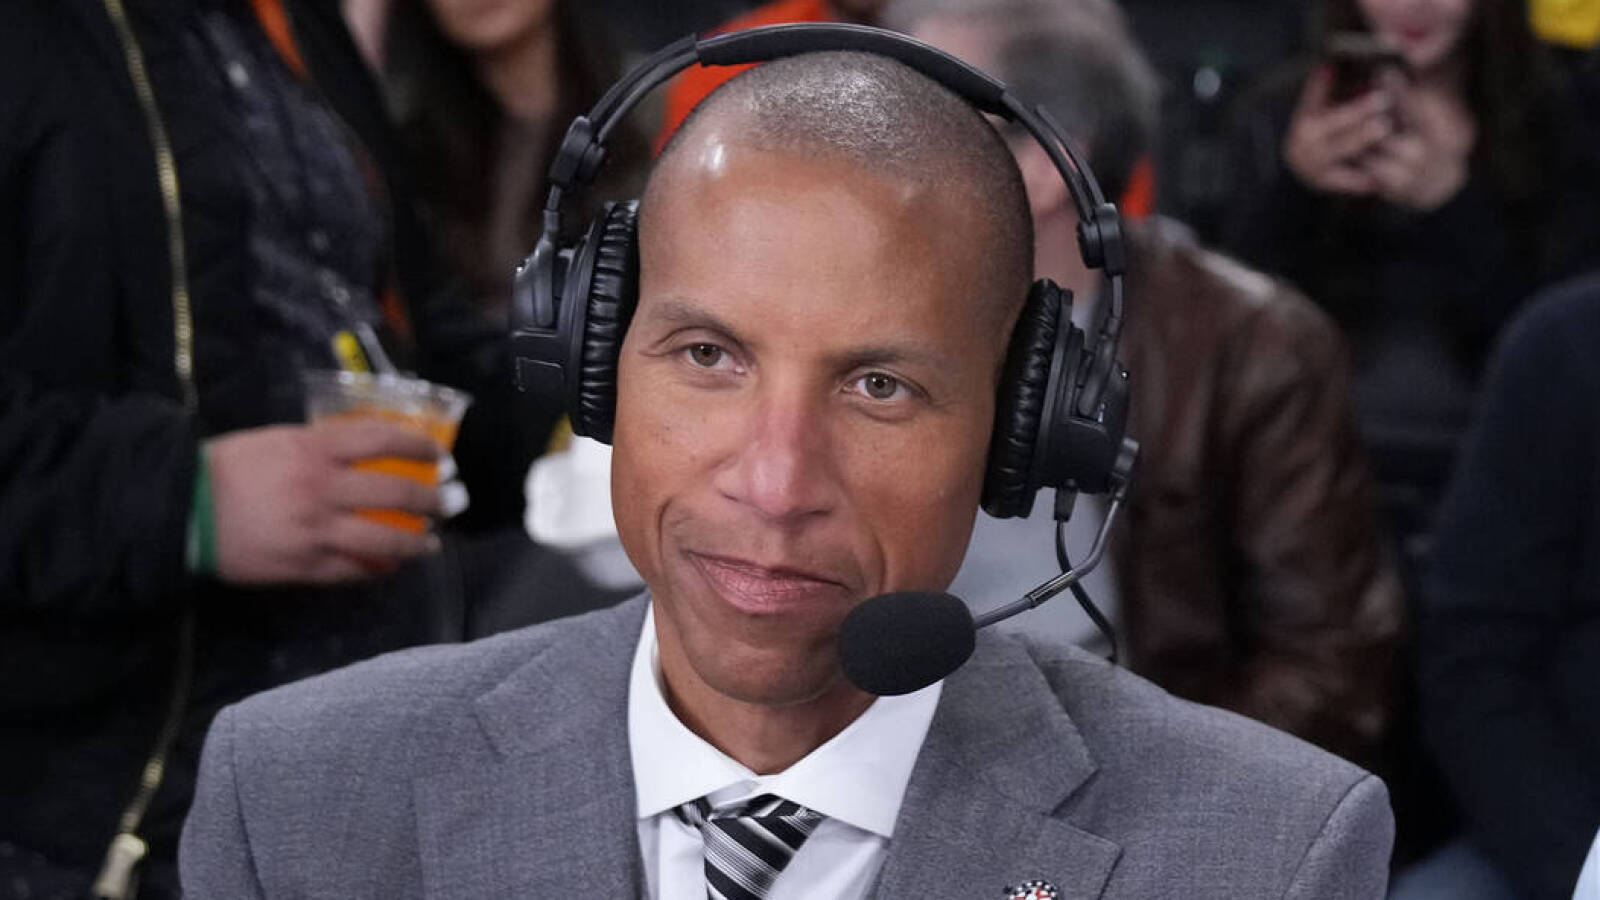 Reggie Miller rips into refs for missed call in Timberwolves-Nuggets Game 1